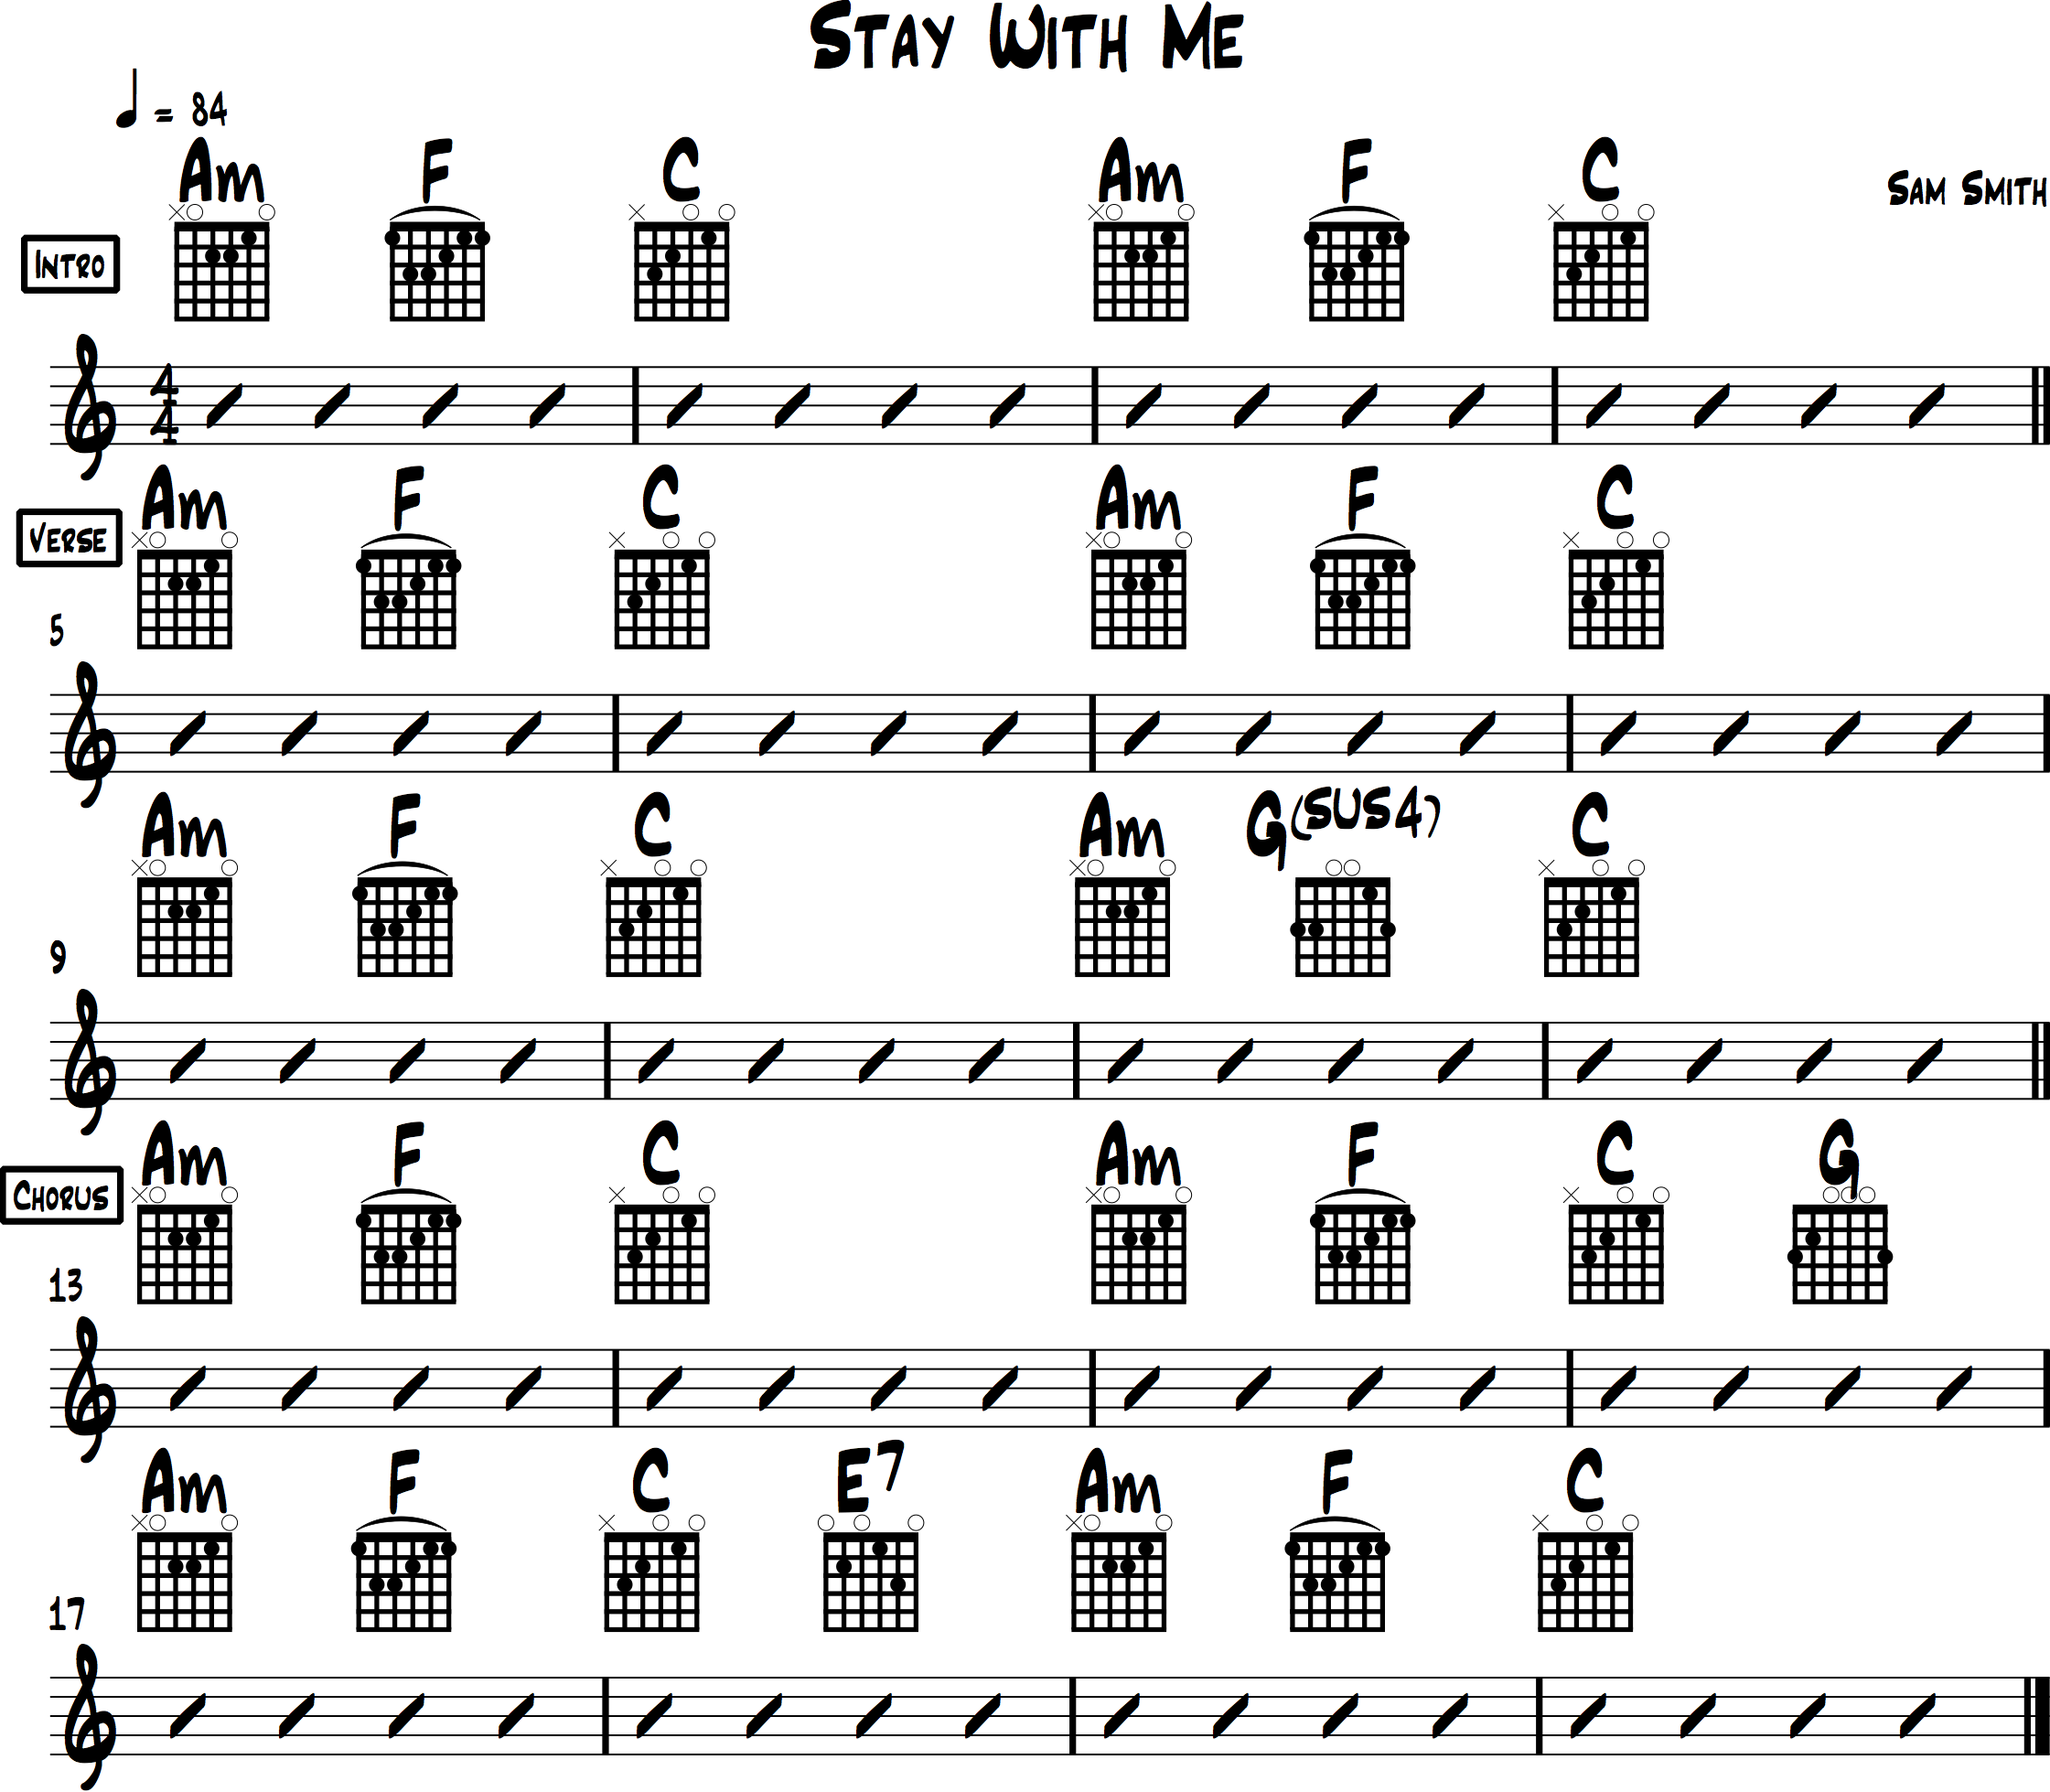 Video - Sam Smith - Stay With Me (Fingerstyle Guitar Tab-Lesson)